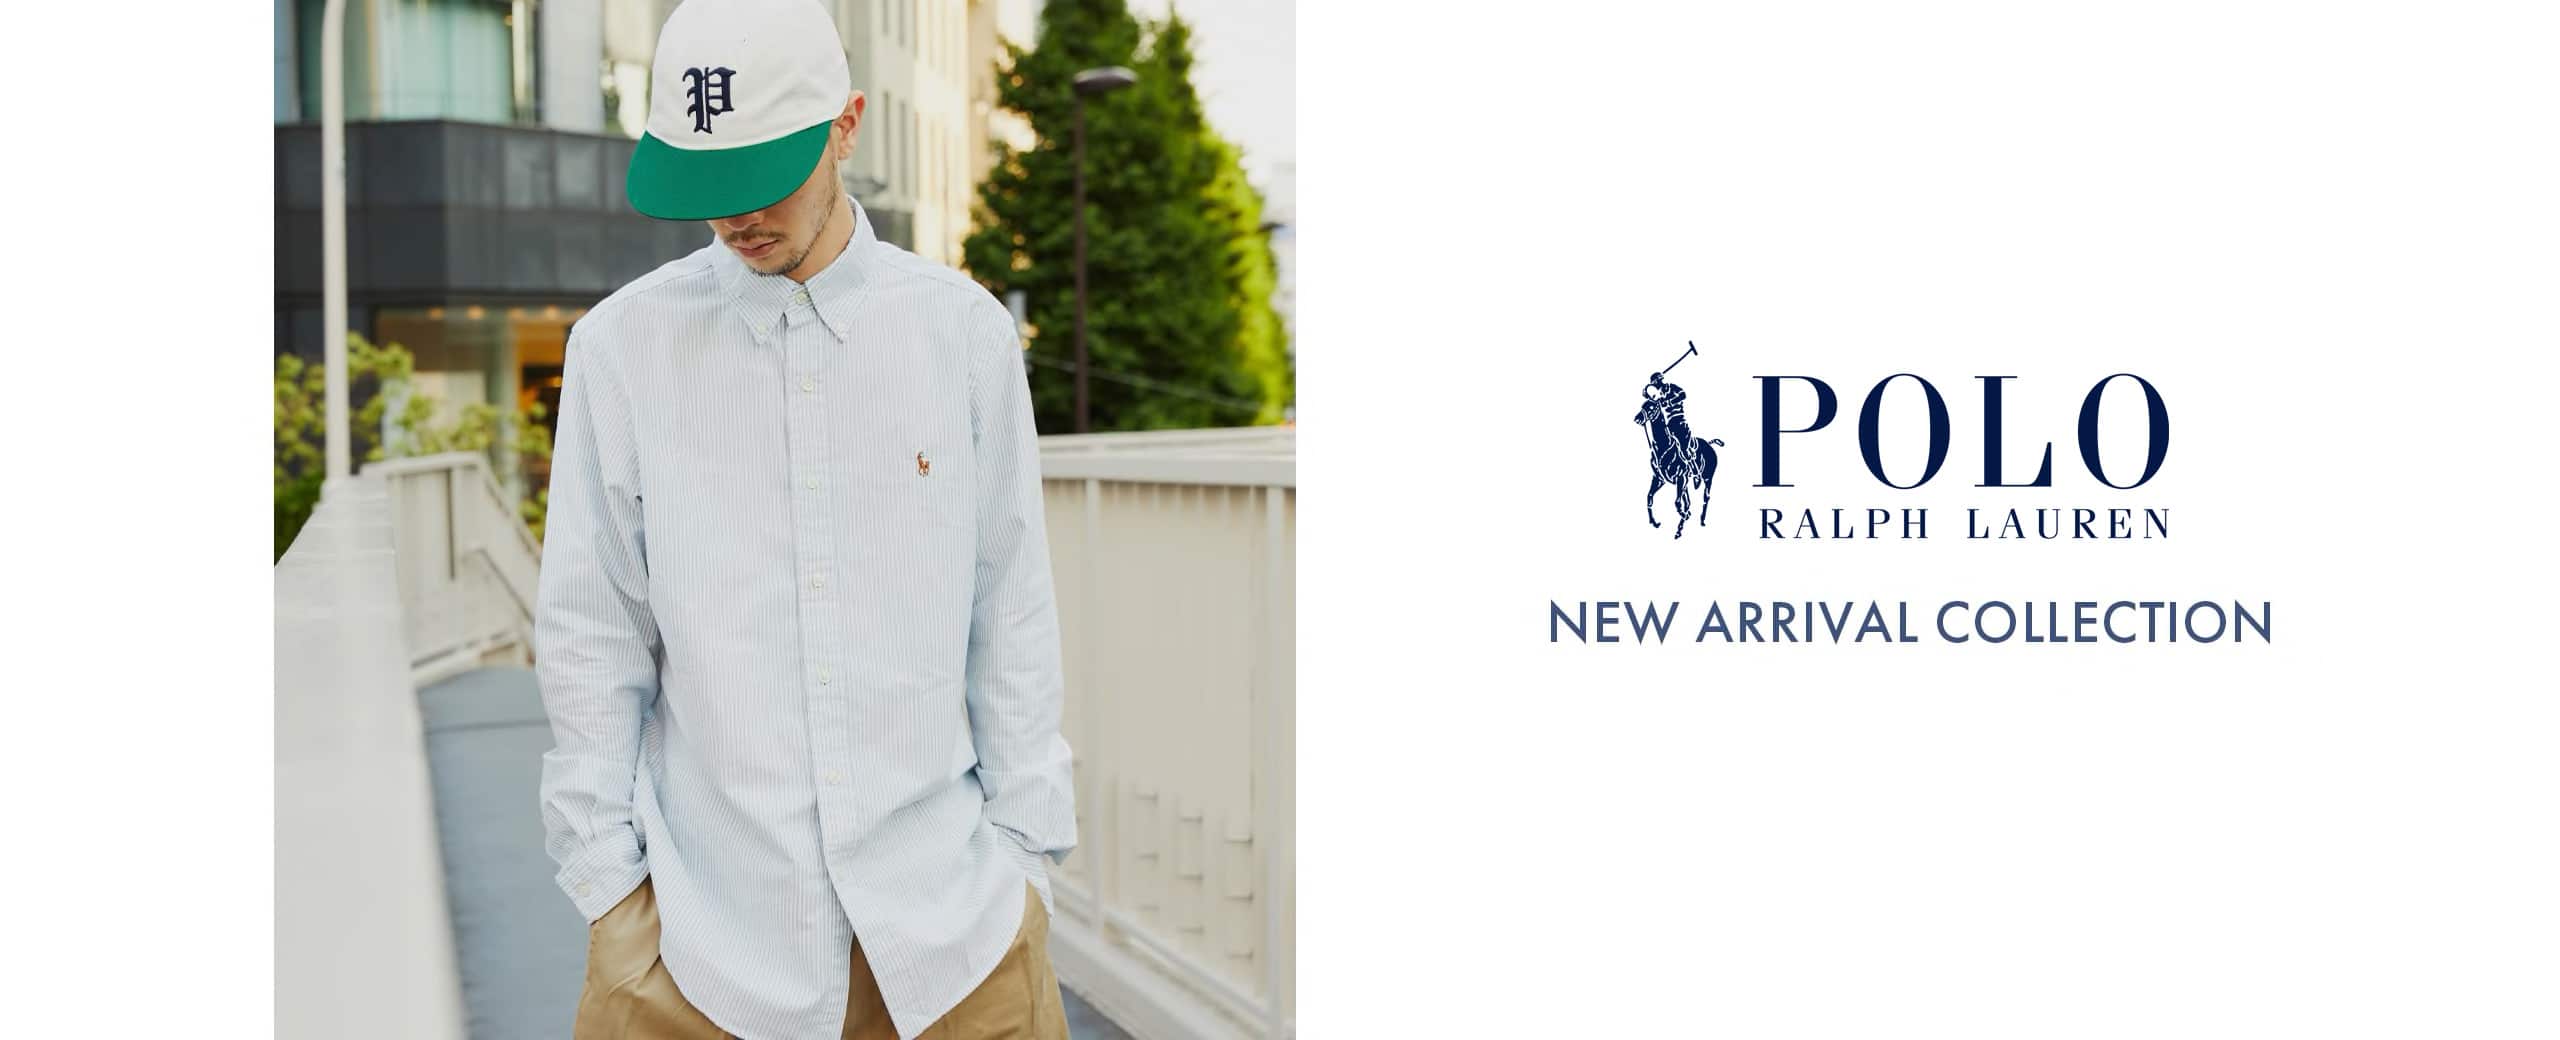 "POLO RALPH LAUREN NEW ARRIVAL COLLECTION"